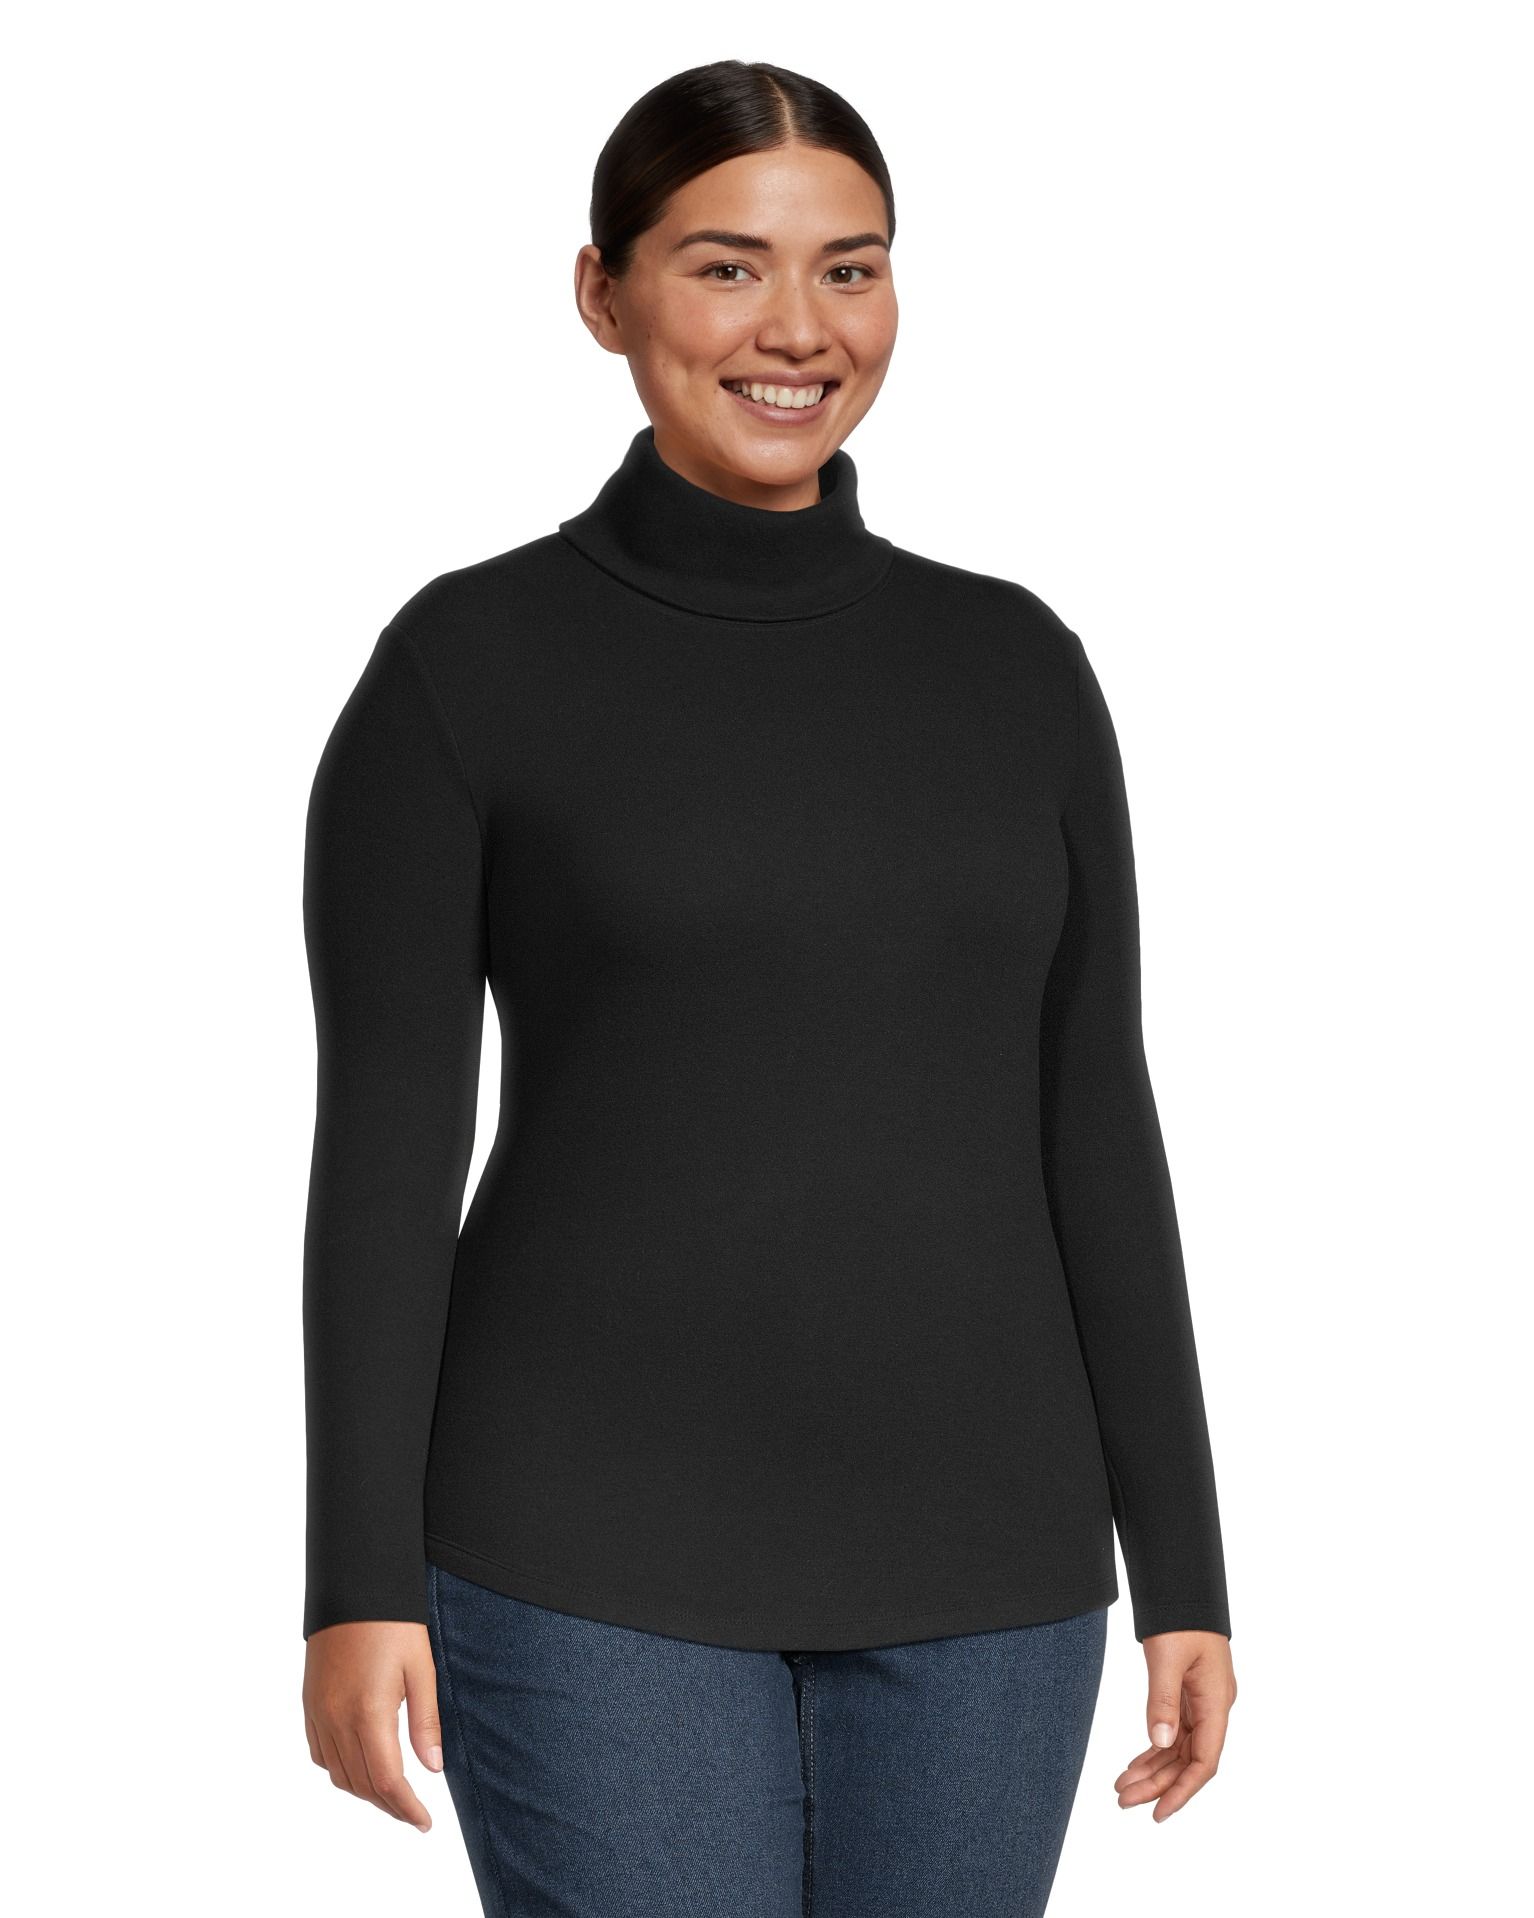 WindRiver Women's Semi Fitted Long Sleeve Turtleneck Top